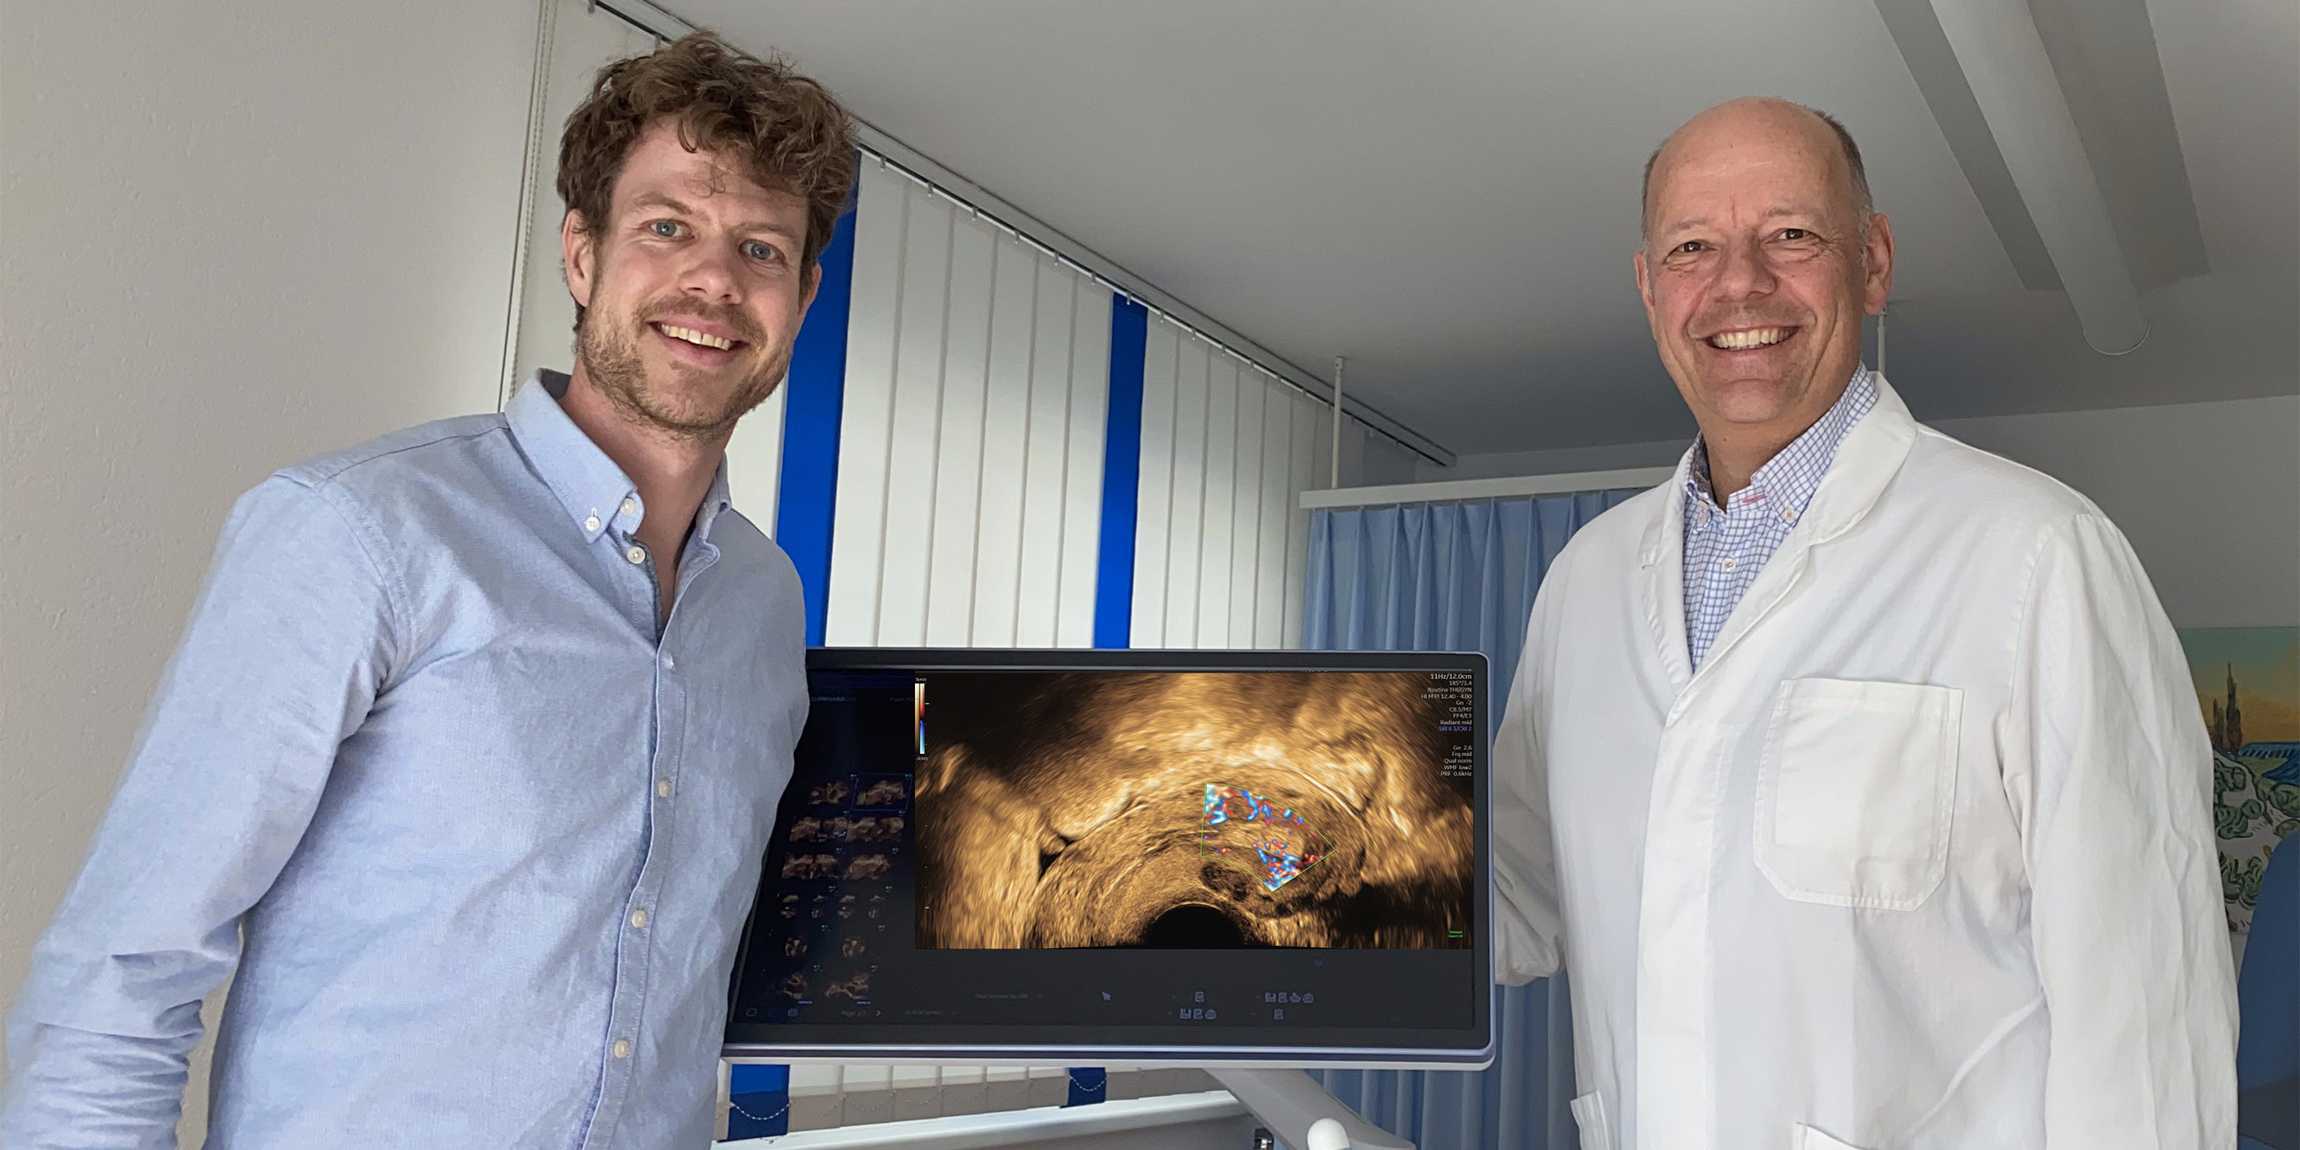 ETH researcher Fabian Laumer (left) and gynecologist Michael Bajka stand next to a screen showing an ultrasound image.